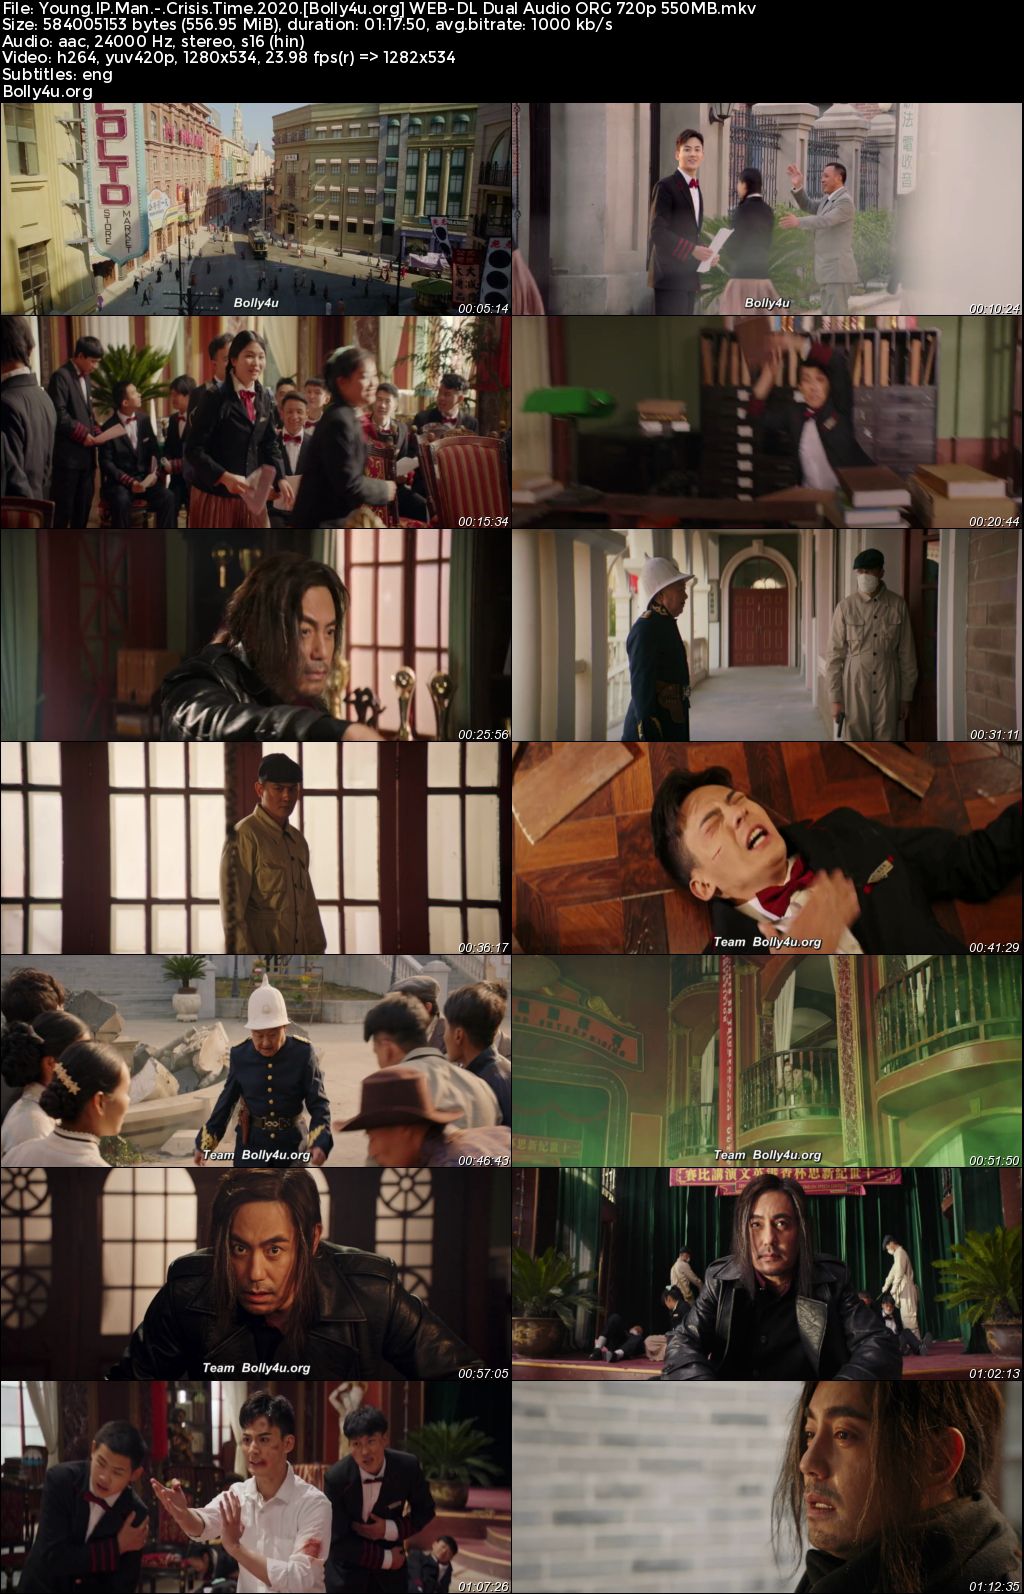 Young IP Man Crisis Time 2020 WEB-DL Hindi Dubbed Movie Download 1080p 720p 480p